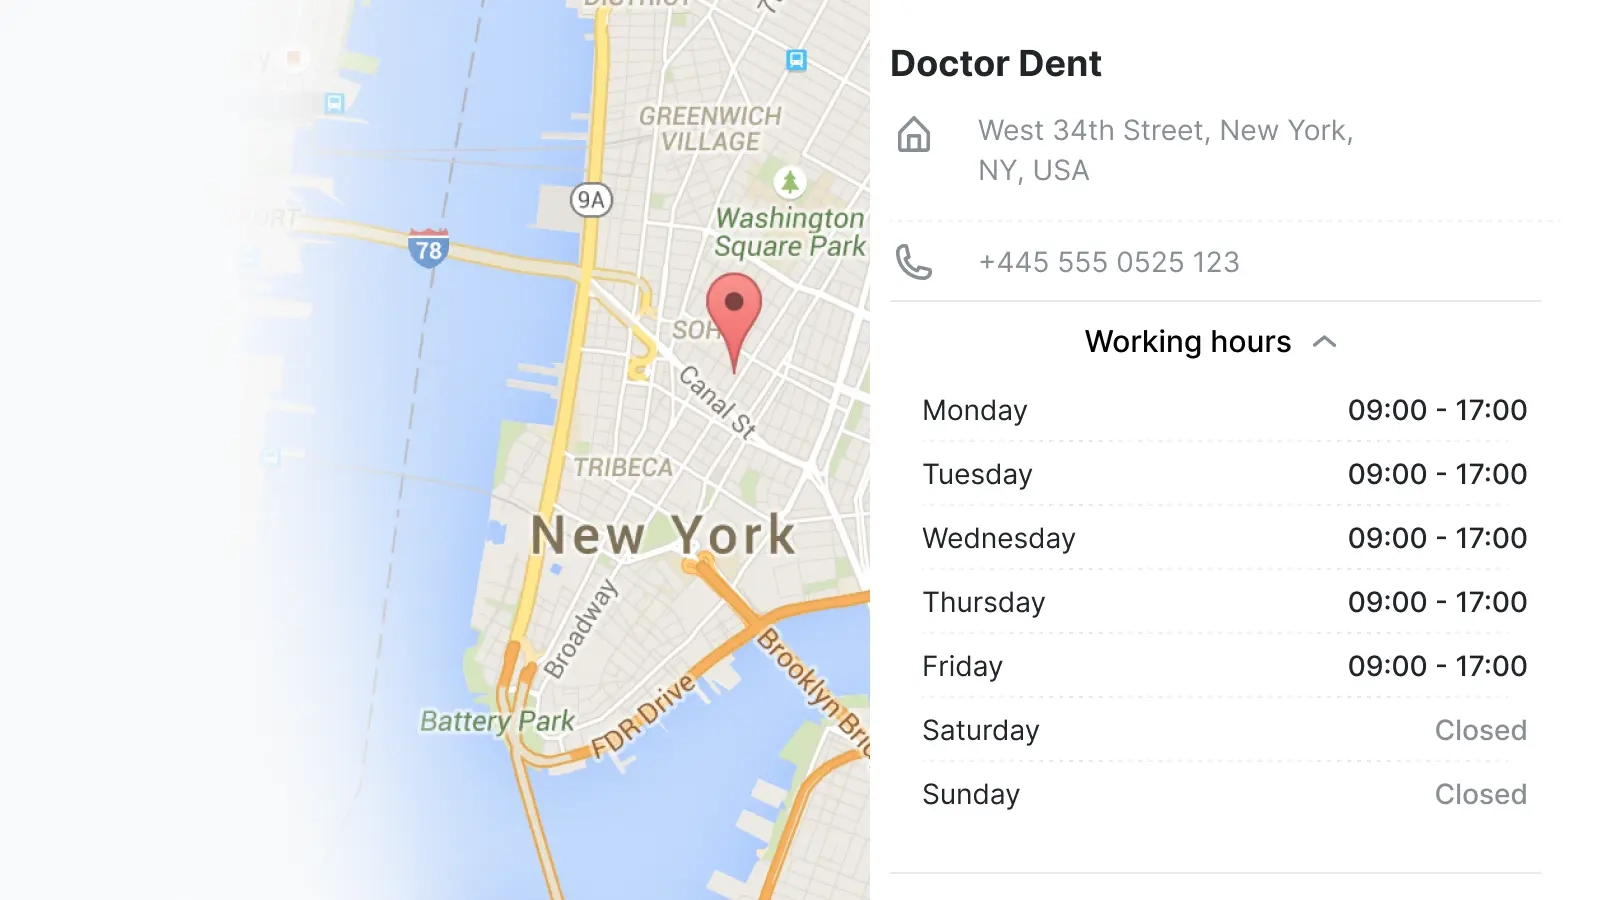 A photo showing a business location and working hours set in Trafft clinic appointment scheduling software